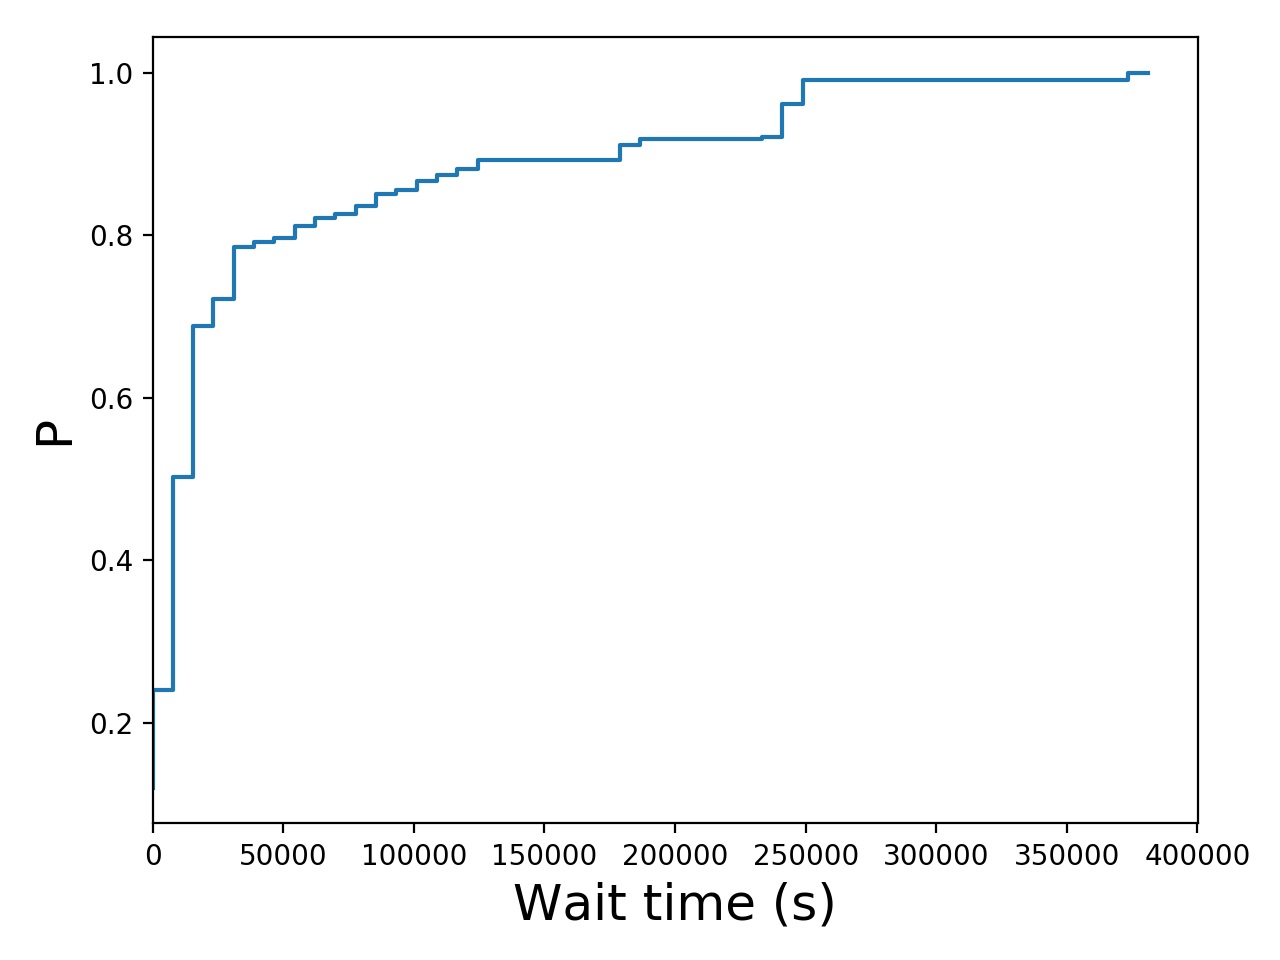 Task wait time CDF graph for the Pegasus_P6a trace.